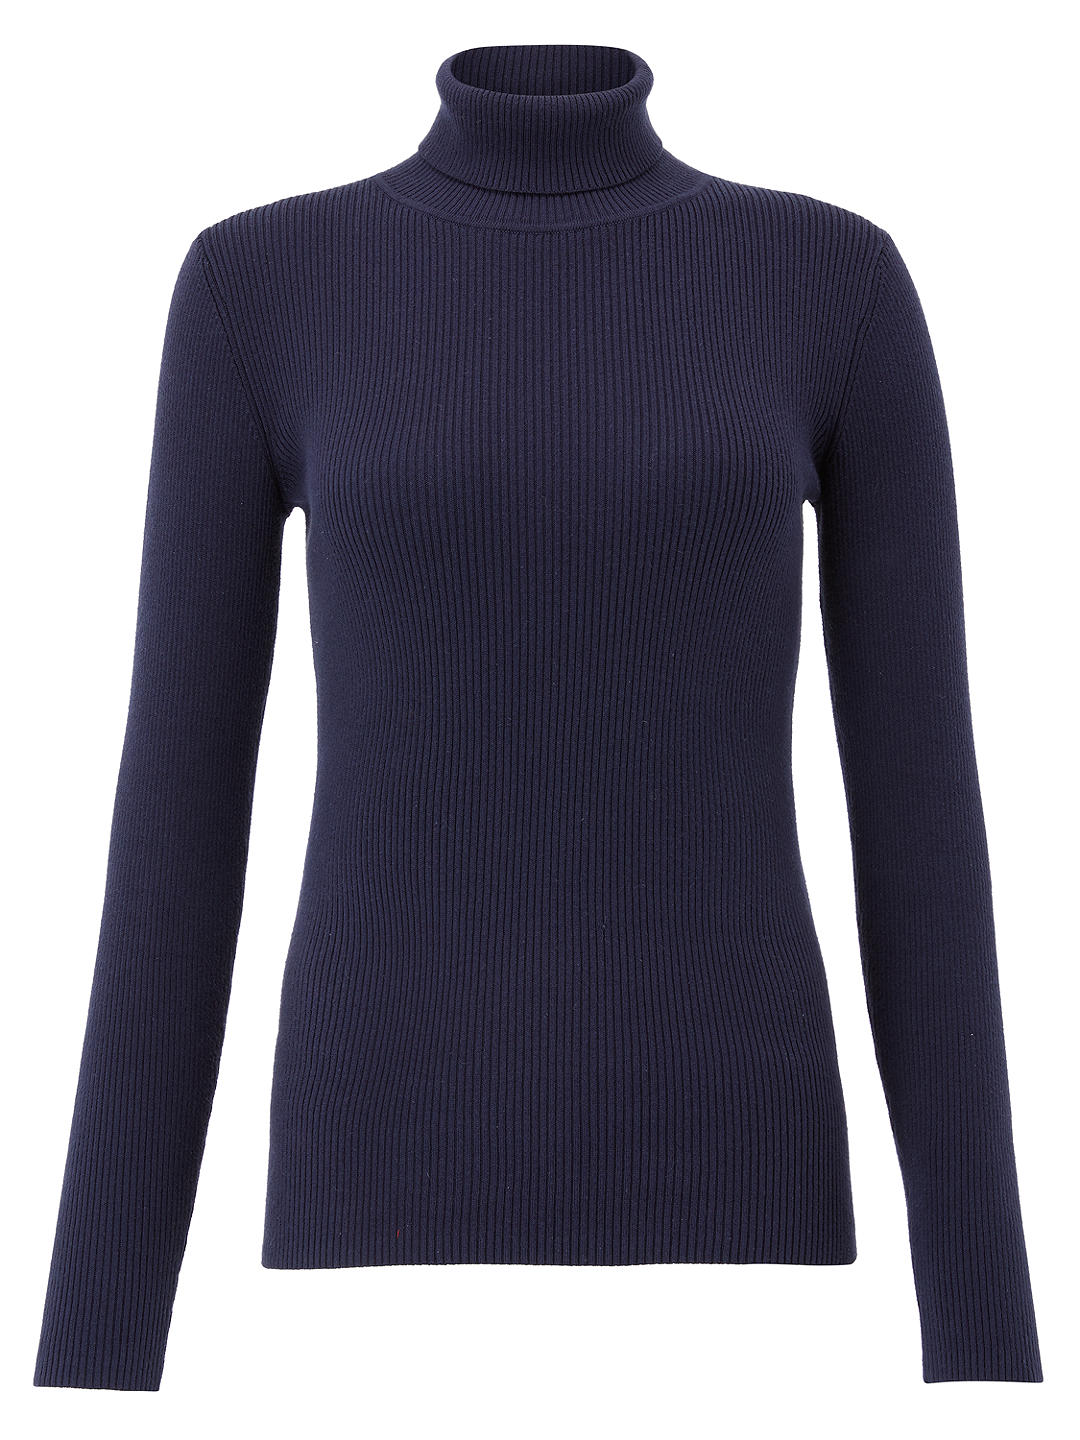 How to Wear this Seasons Must Have Polo Neck - Absolute Image UK